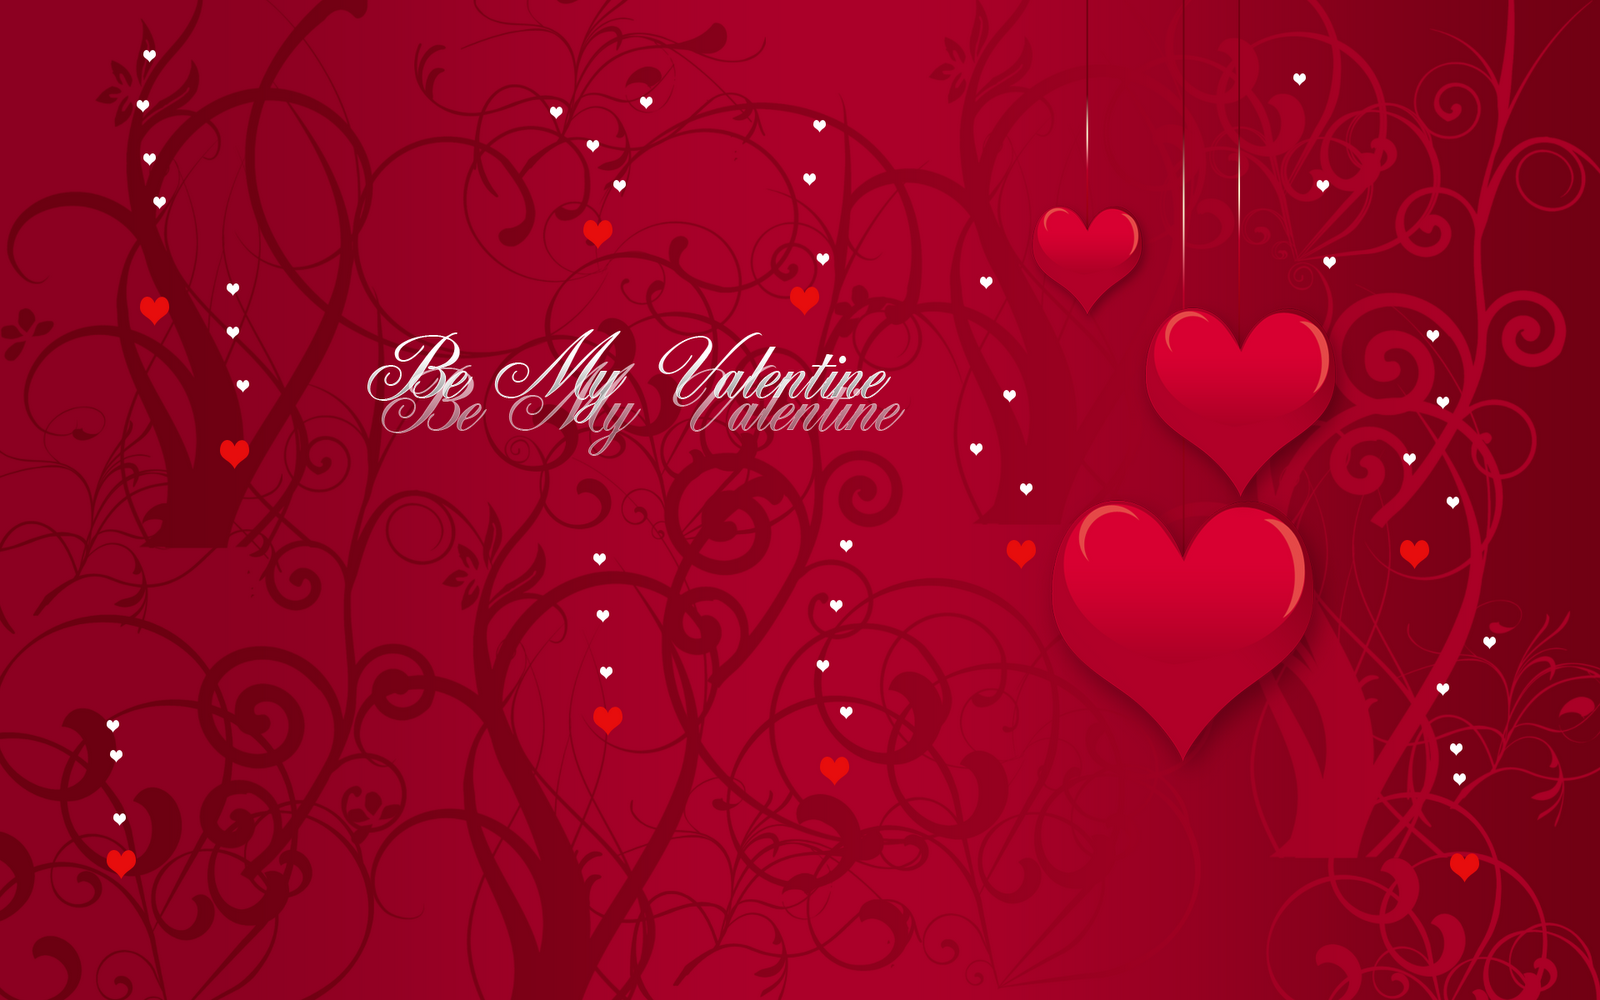  Wallpapers For My Pc   Free HD Wallpapers Valentines Day Wallpaper